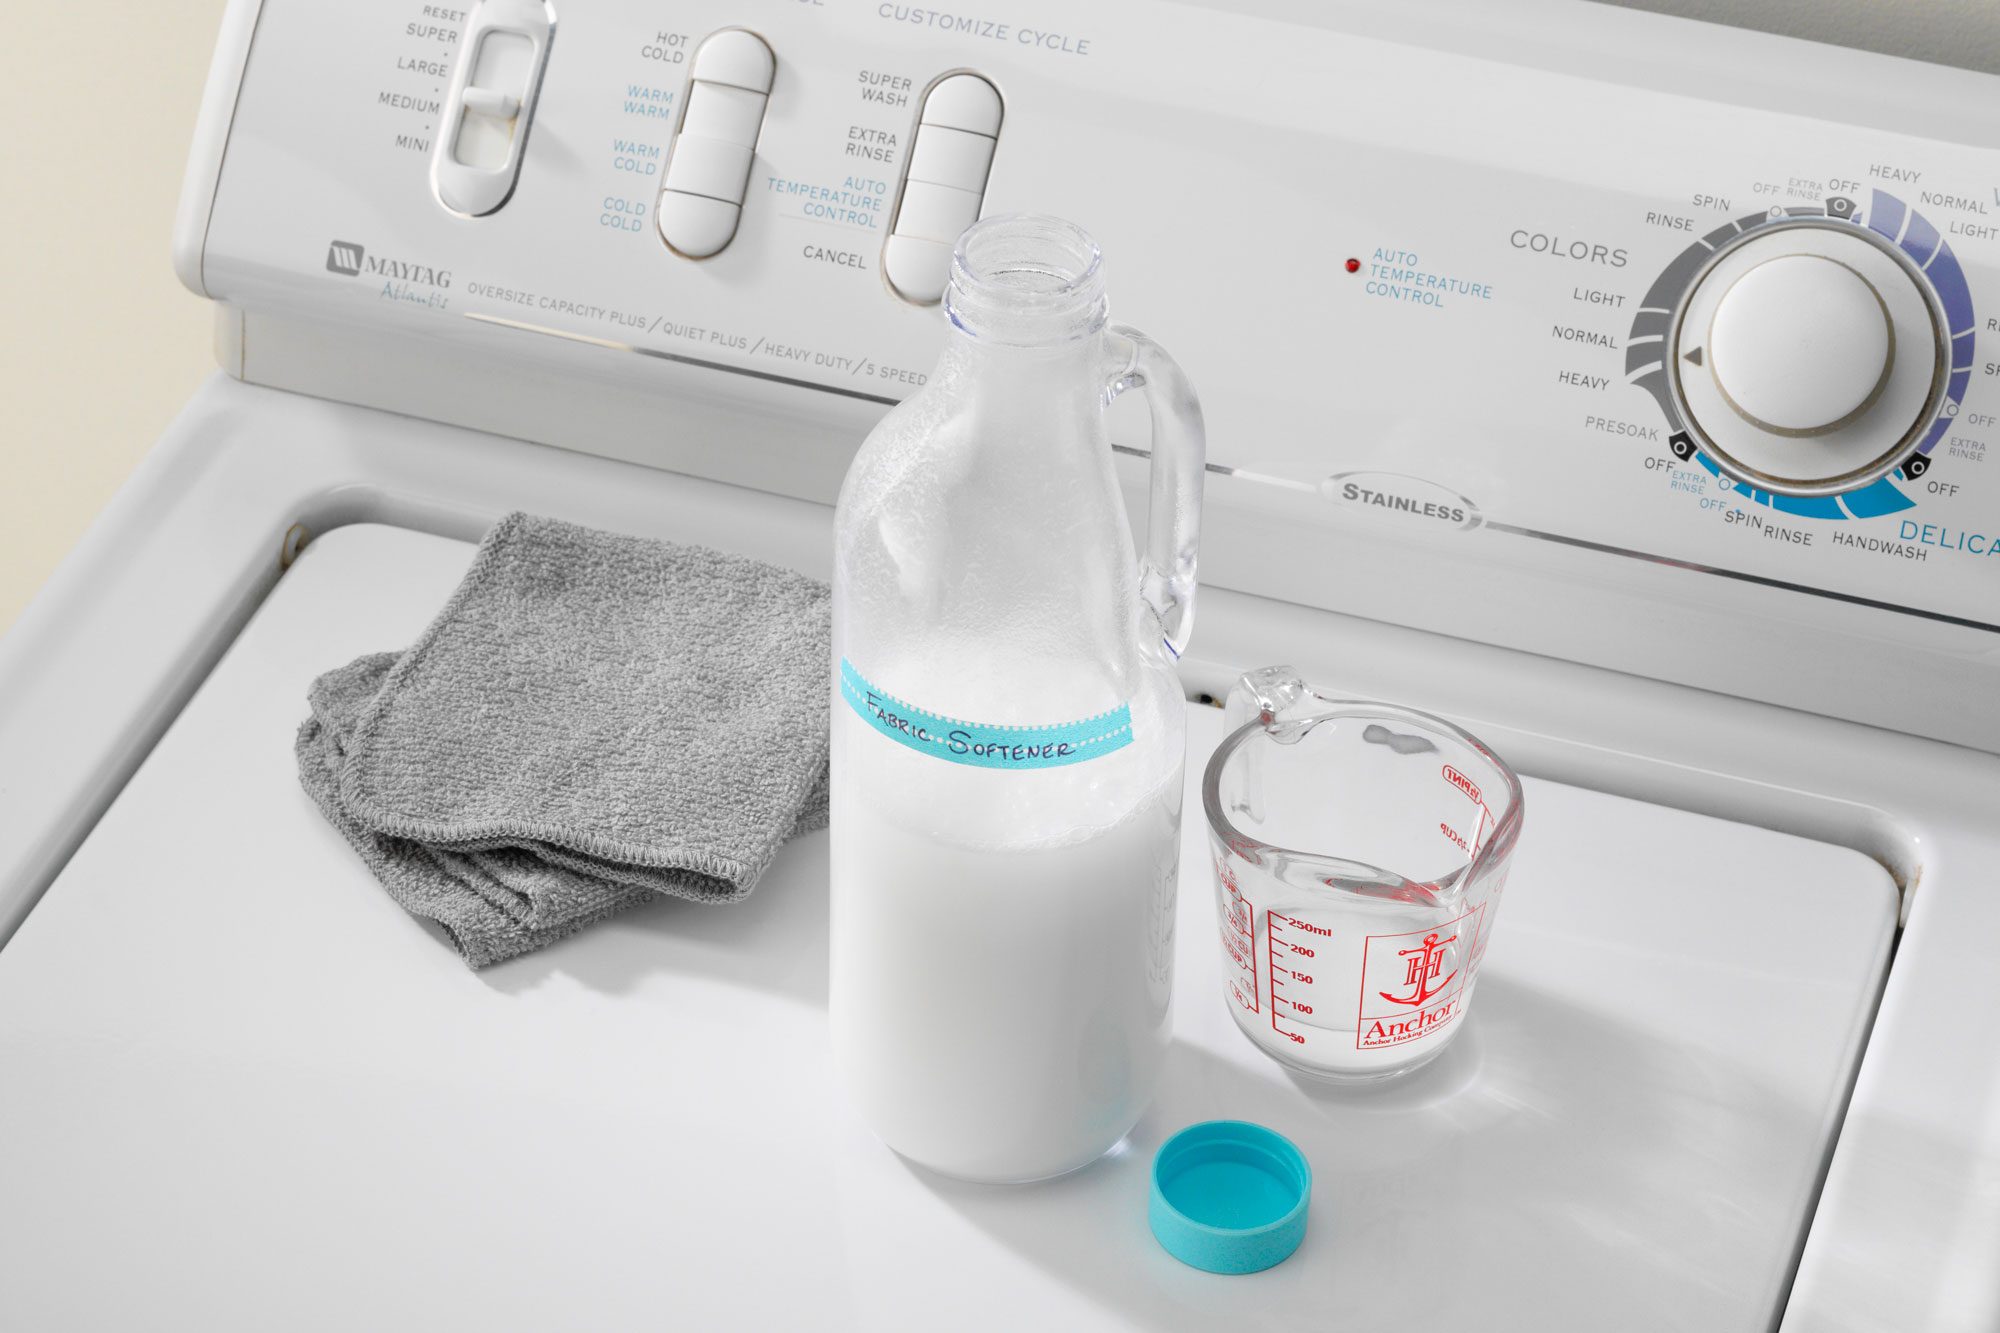 Homemade Cleaners Liquid Fabric Softener in a glass bottle on top of a washing machine next to measuring cup and microfiber cleaning cloth